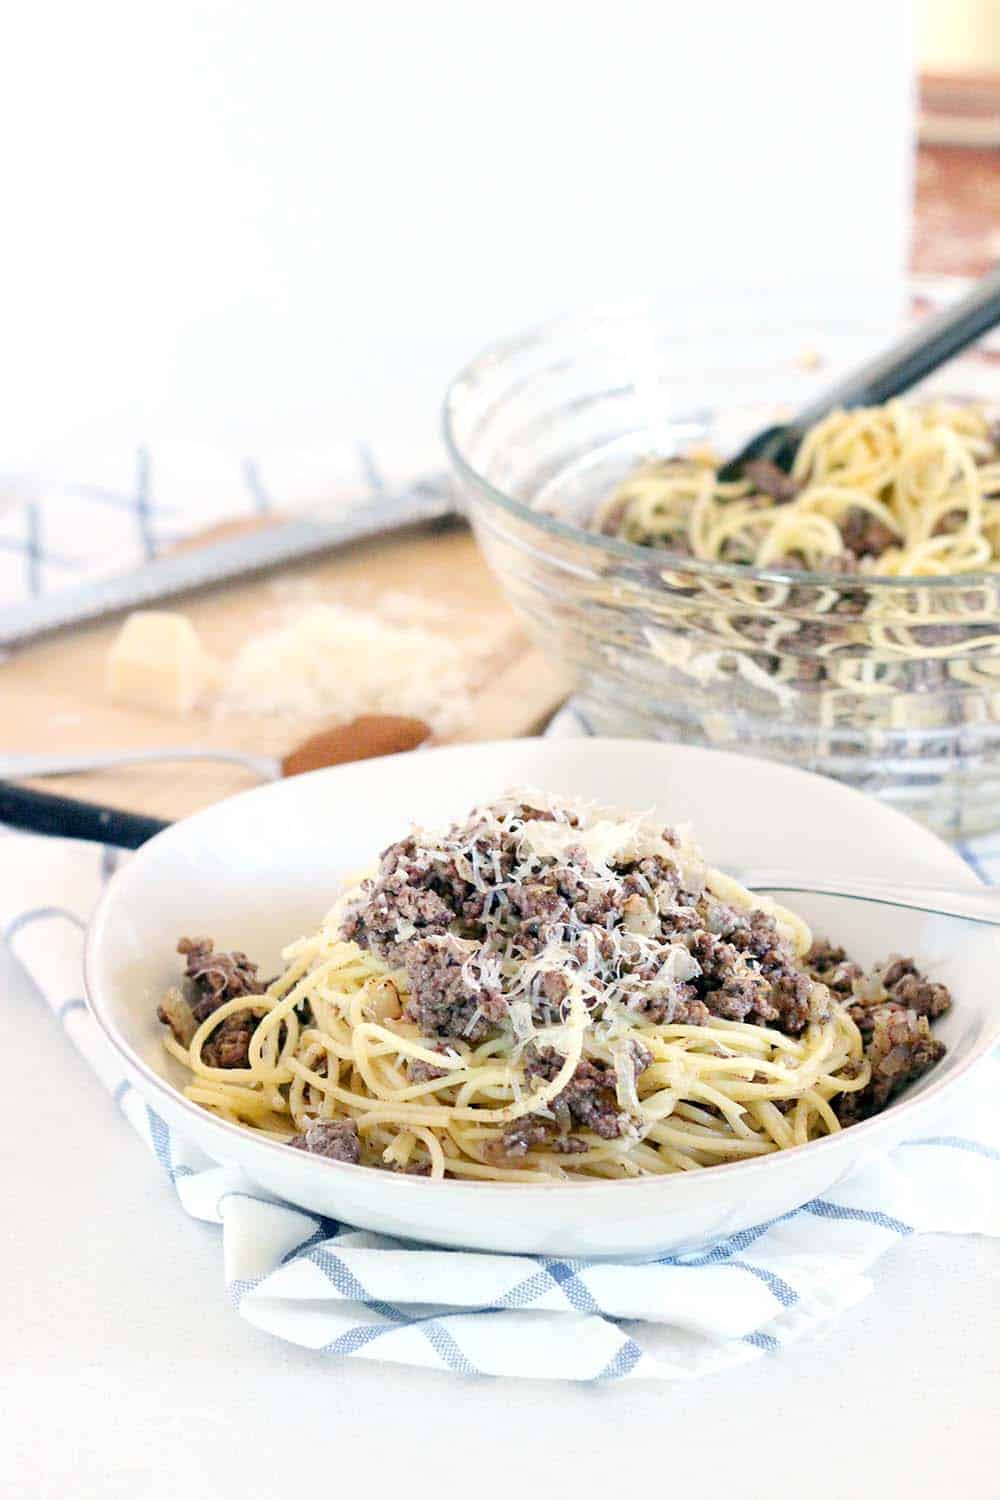 This recipe for Greek Spaghetti has browned beef spiced with cinnamon, is drizzled with earthy browned butter, and is sprinkled with Romano cheese. It's the ULTIMATE Greek comfort food! | www.bowlofdelicious.com